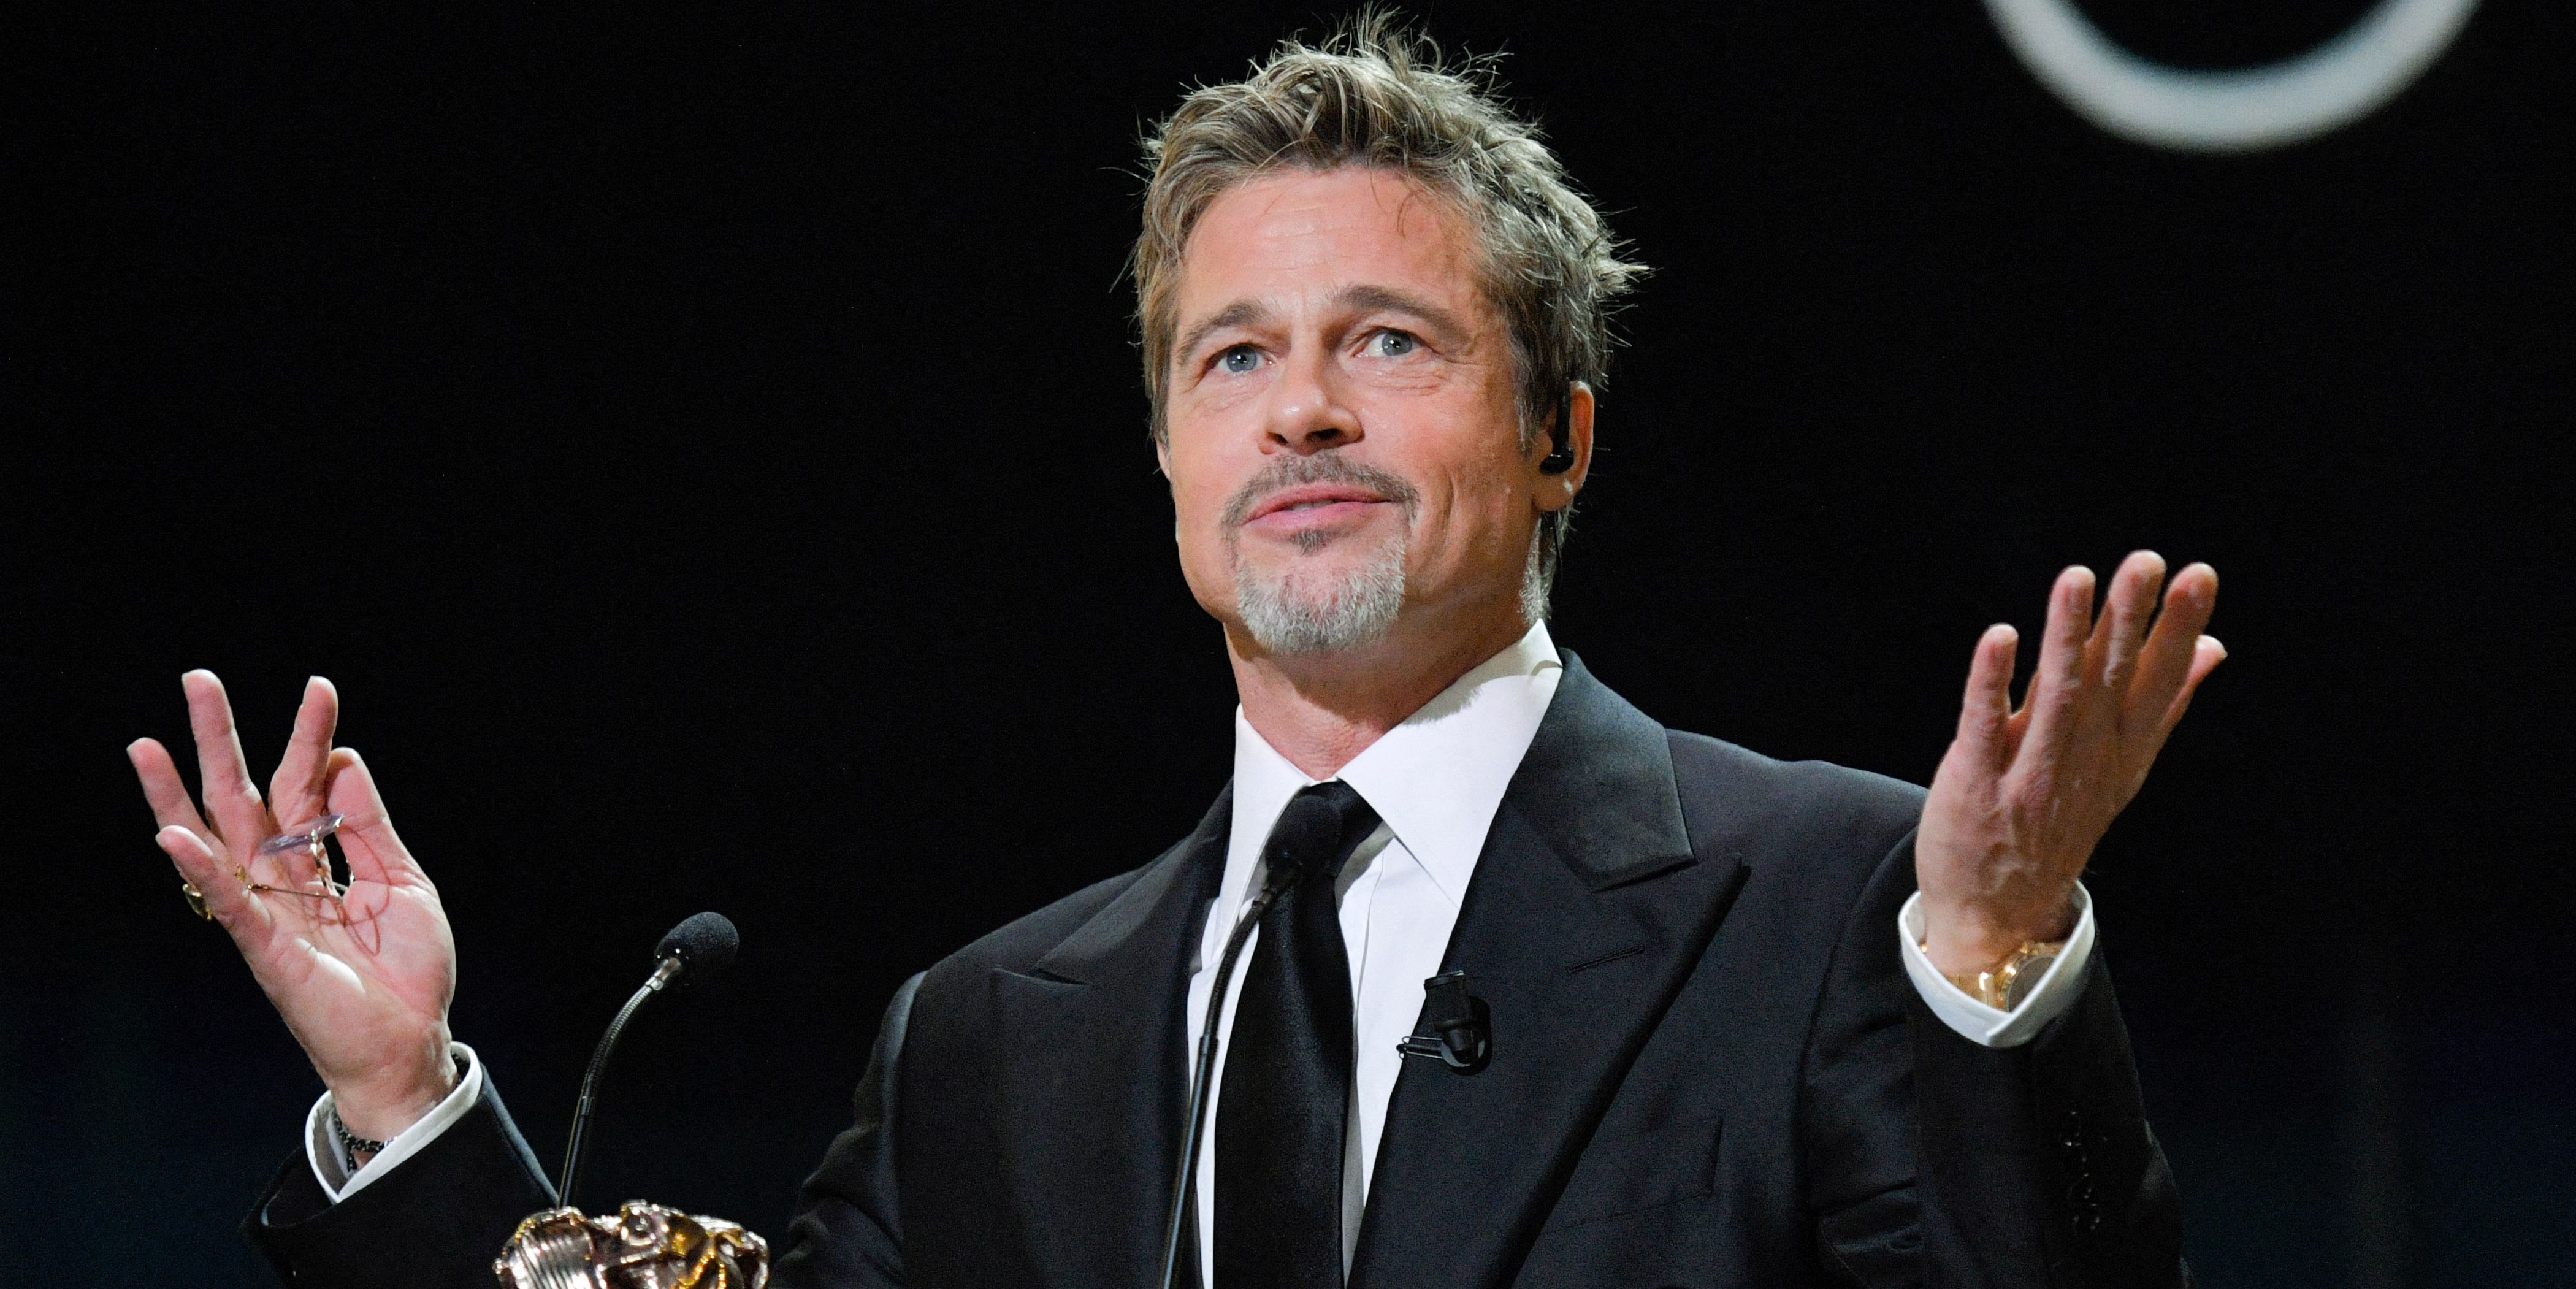 Brad Pitt Quit Scientology In 1993 Because He 